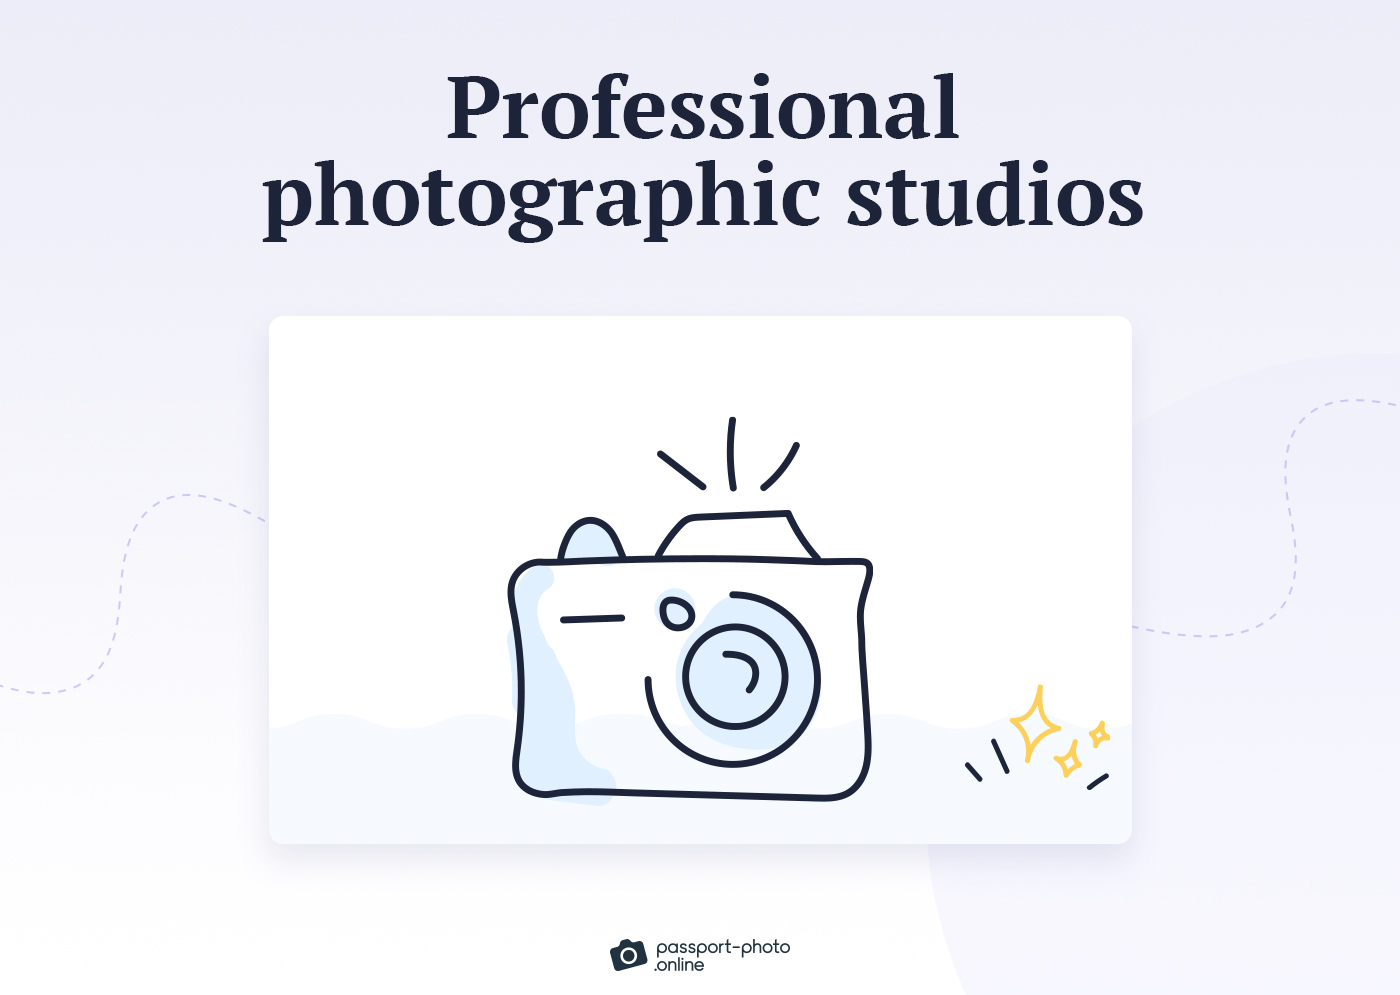 Professional photographic studios can provide customers with passport photos.